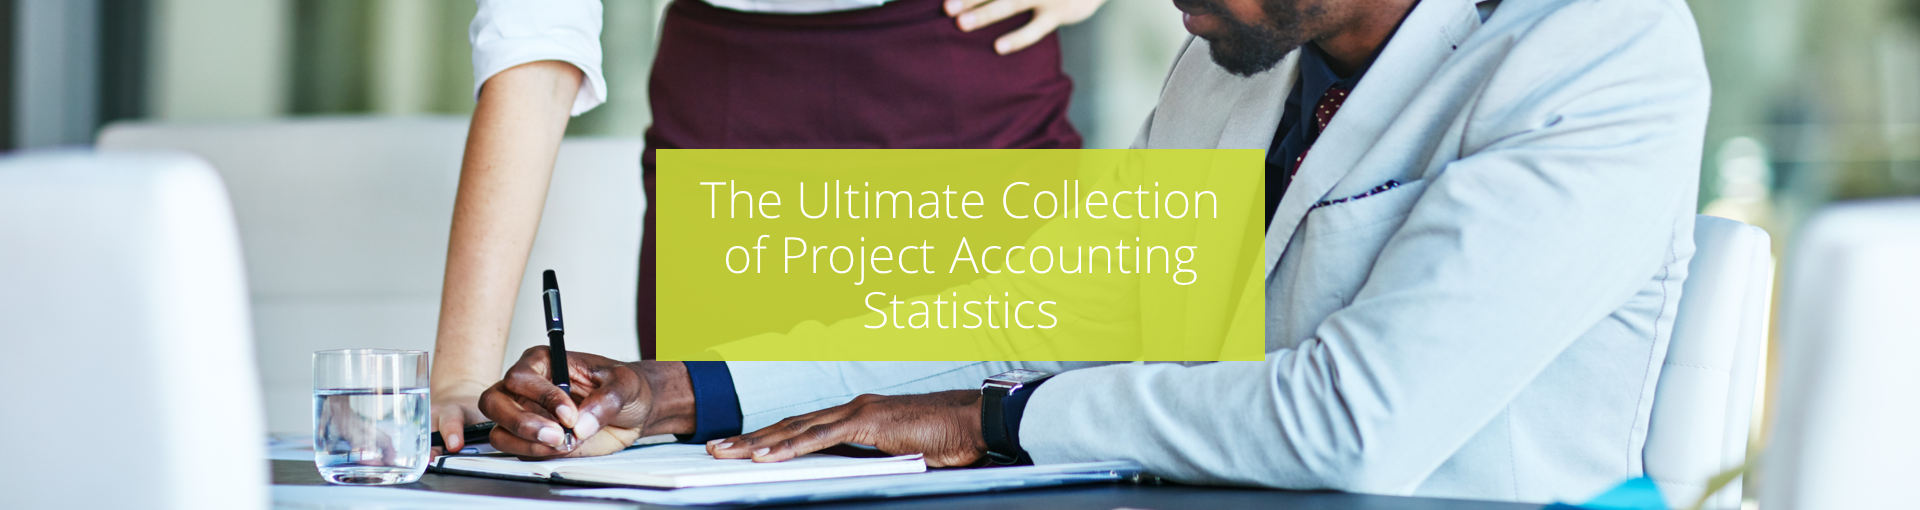 The Ultimate Collection of Project Accounting Statistics Featured Image